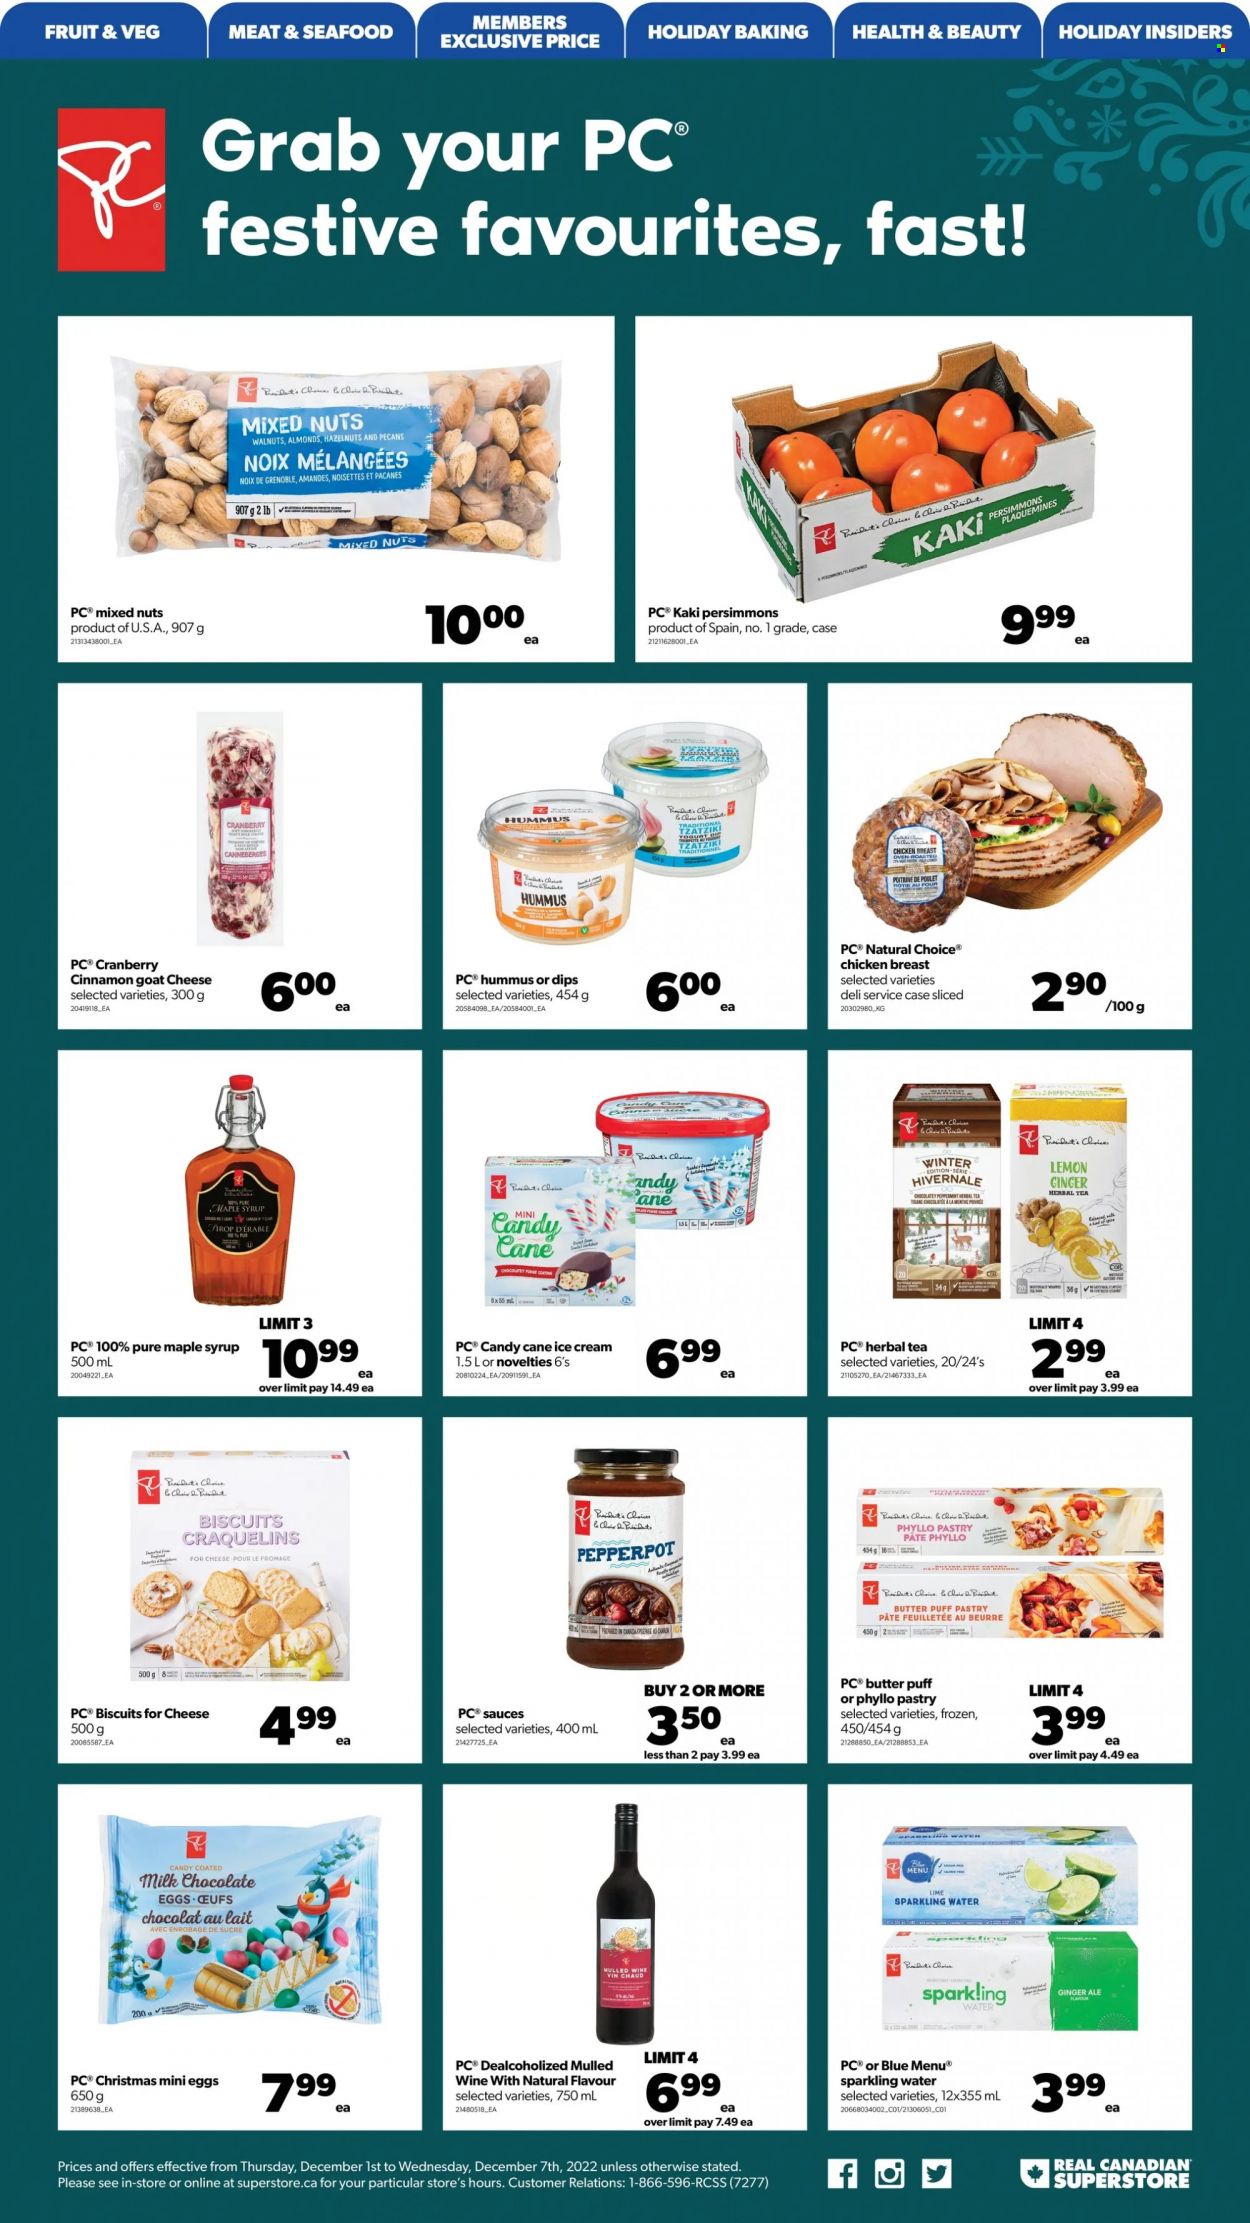 thumbnail - Real Canadian Superstore Flyer - December 01, 2022 - December 07, 2022 - Sales products - persimmons, seafood, tzatziki, hummus, goat cheese, cheese, Président, yoghurt, puff pastry, ice cream, milk chocolate, candy cane, biscuit, chocolate egg, spice, cinnamon, maple syrup, syrup, almonds, walnuts, pecans, mixed nuts, ginger ale, sparkling water, tea, herbal tea, wine, chicken breasts, chicken. Page 5.